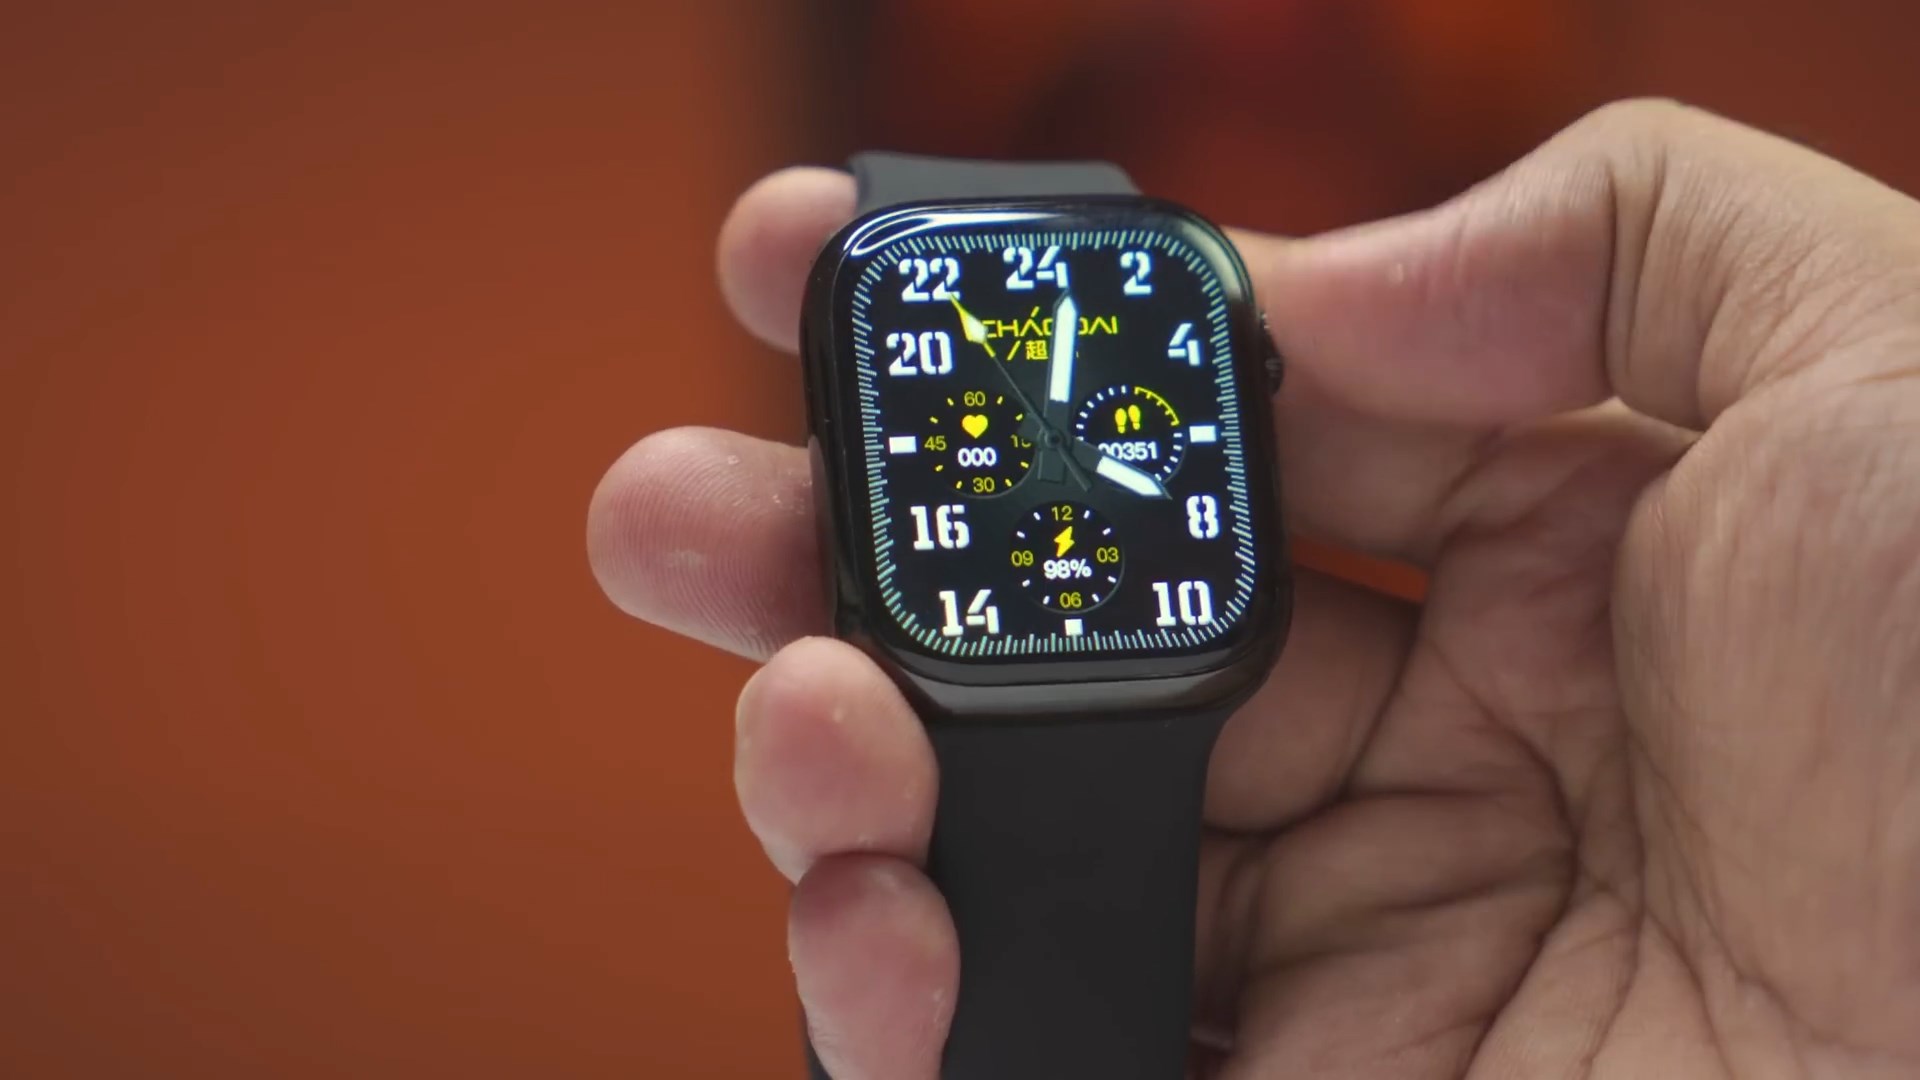 DT7 Max 2 Smartwatch Review